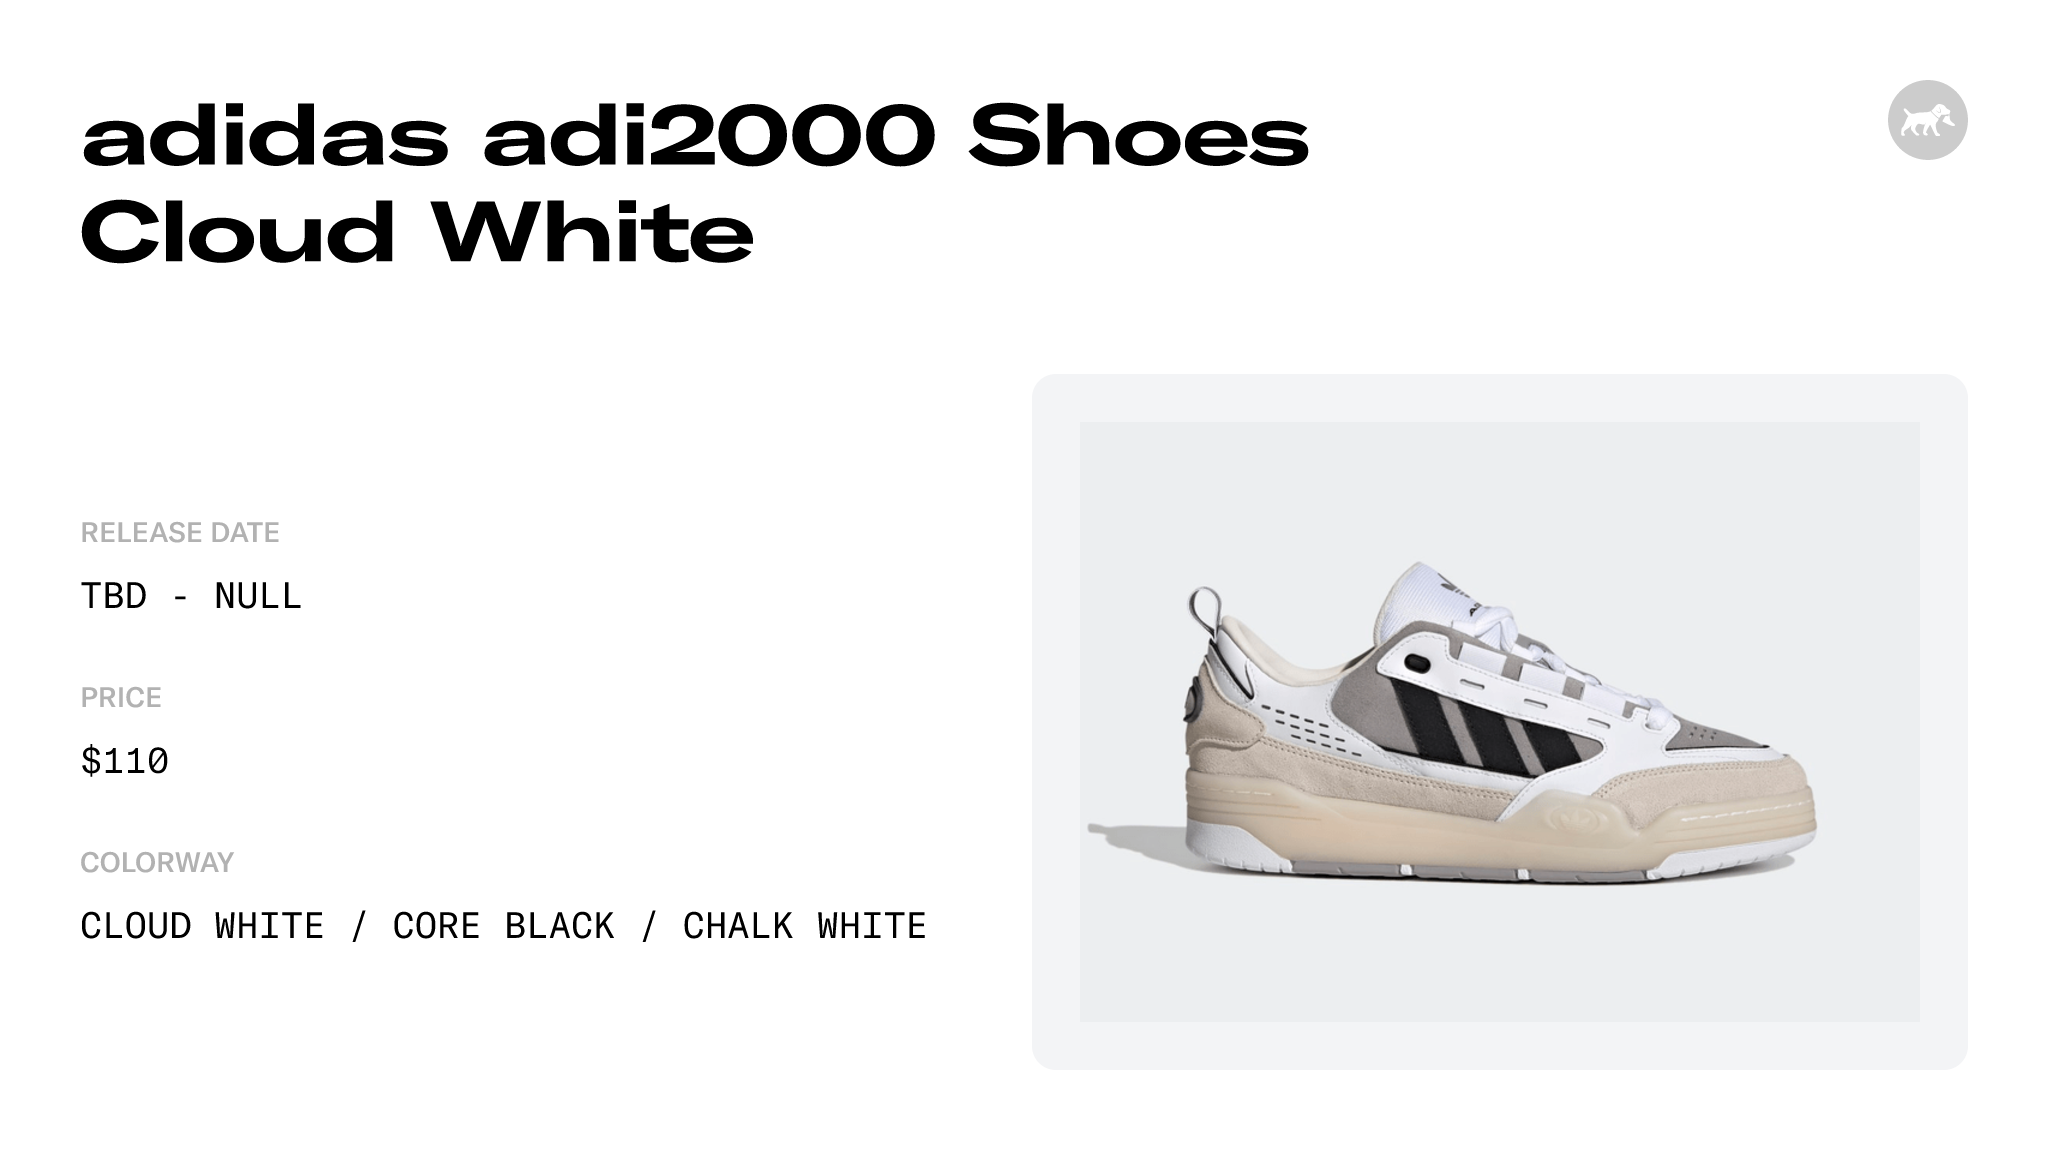 adidas adi2000 Shoes Cloud Date White and Release GV9544 Raffles 